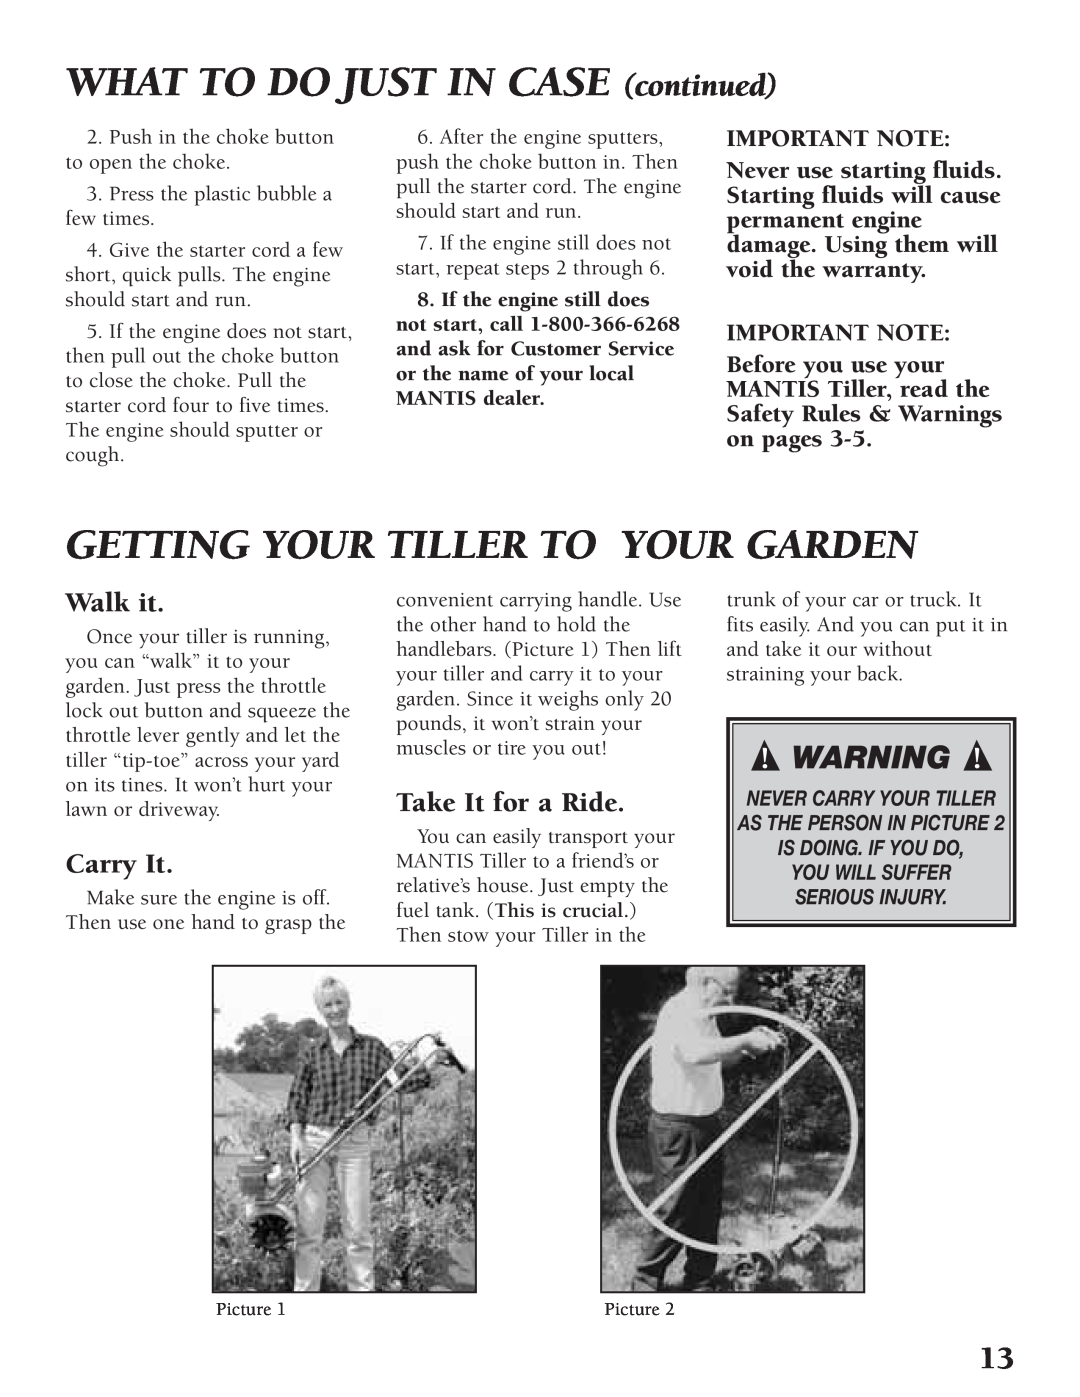 Little Wonder Tiller/Cultivator WHAT TO DO JUST IN CASE continued, Getting Your Tiller To Your Garden, Walk it, Carry It 